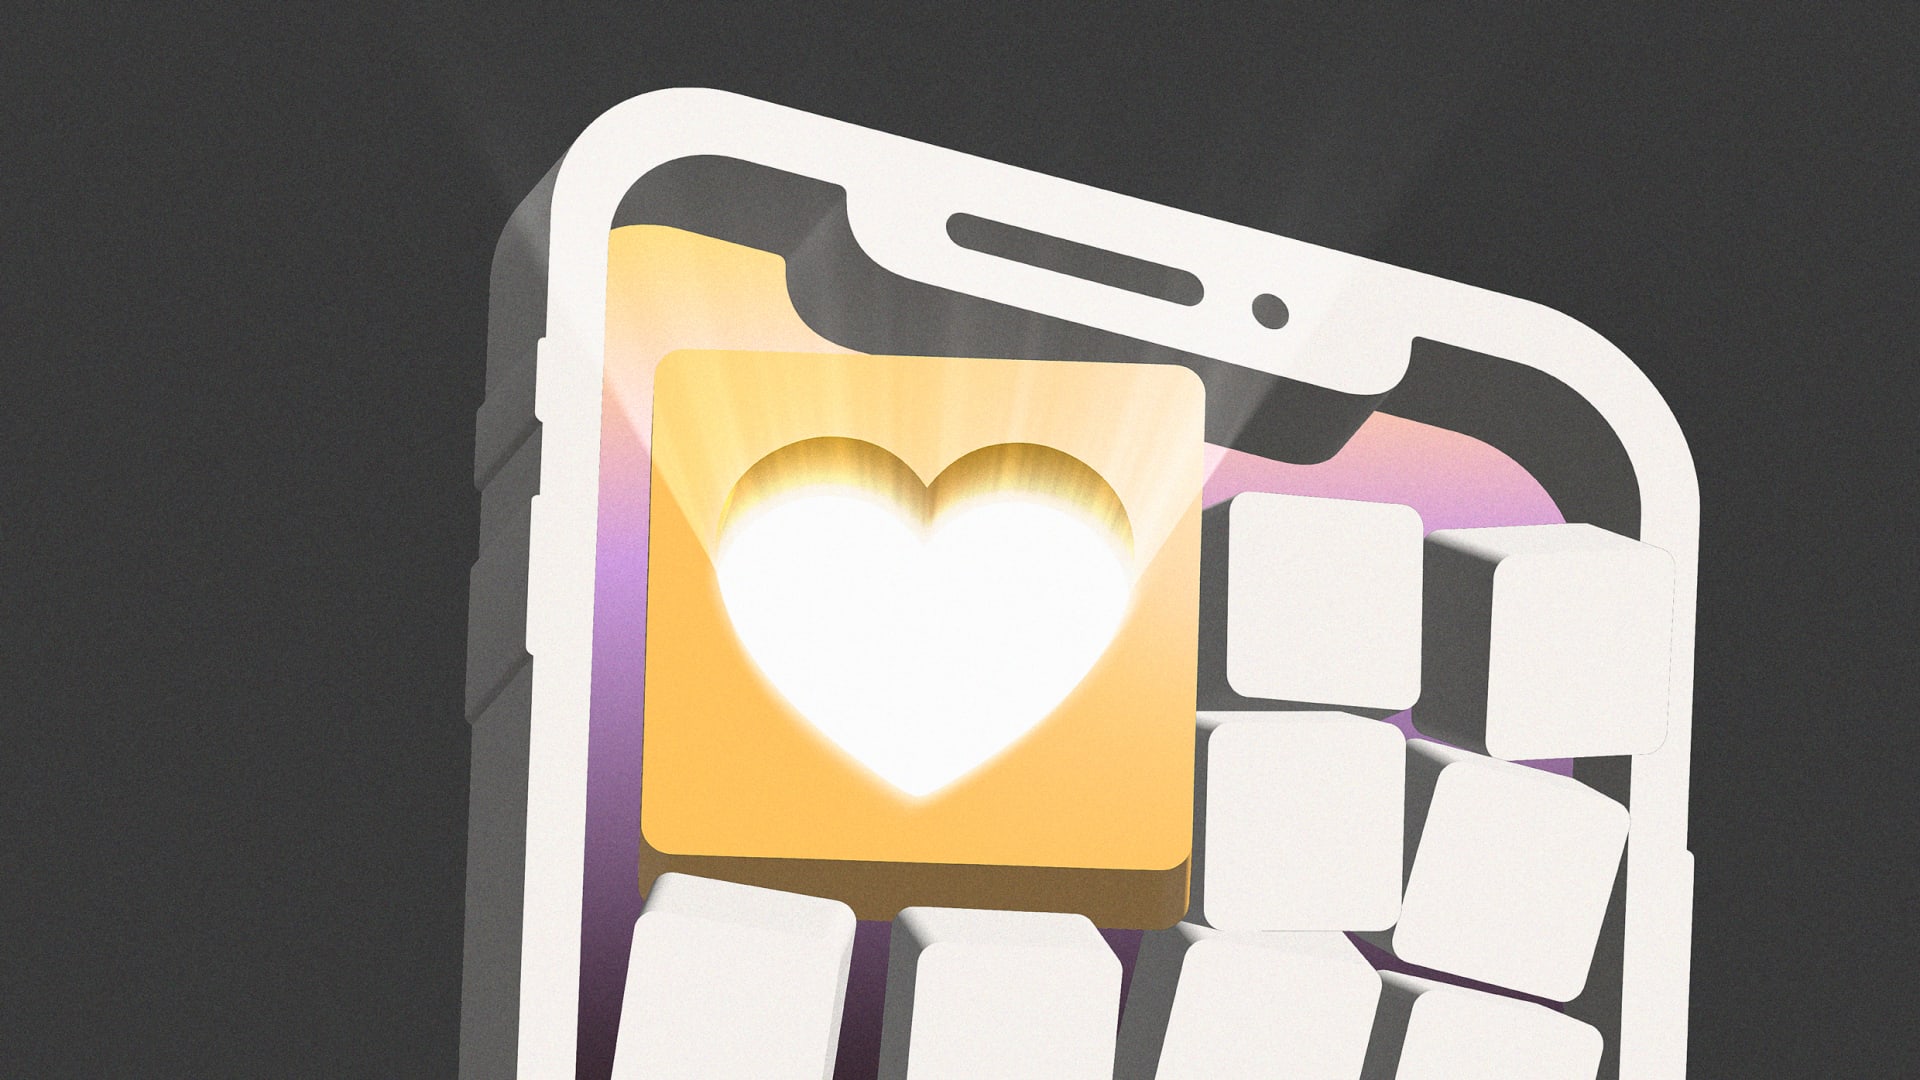 Locket, the #1 app in Apple’s App Store, uses a trick hiding in plain sight